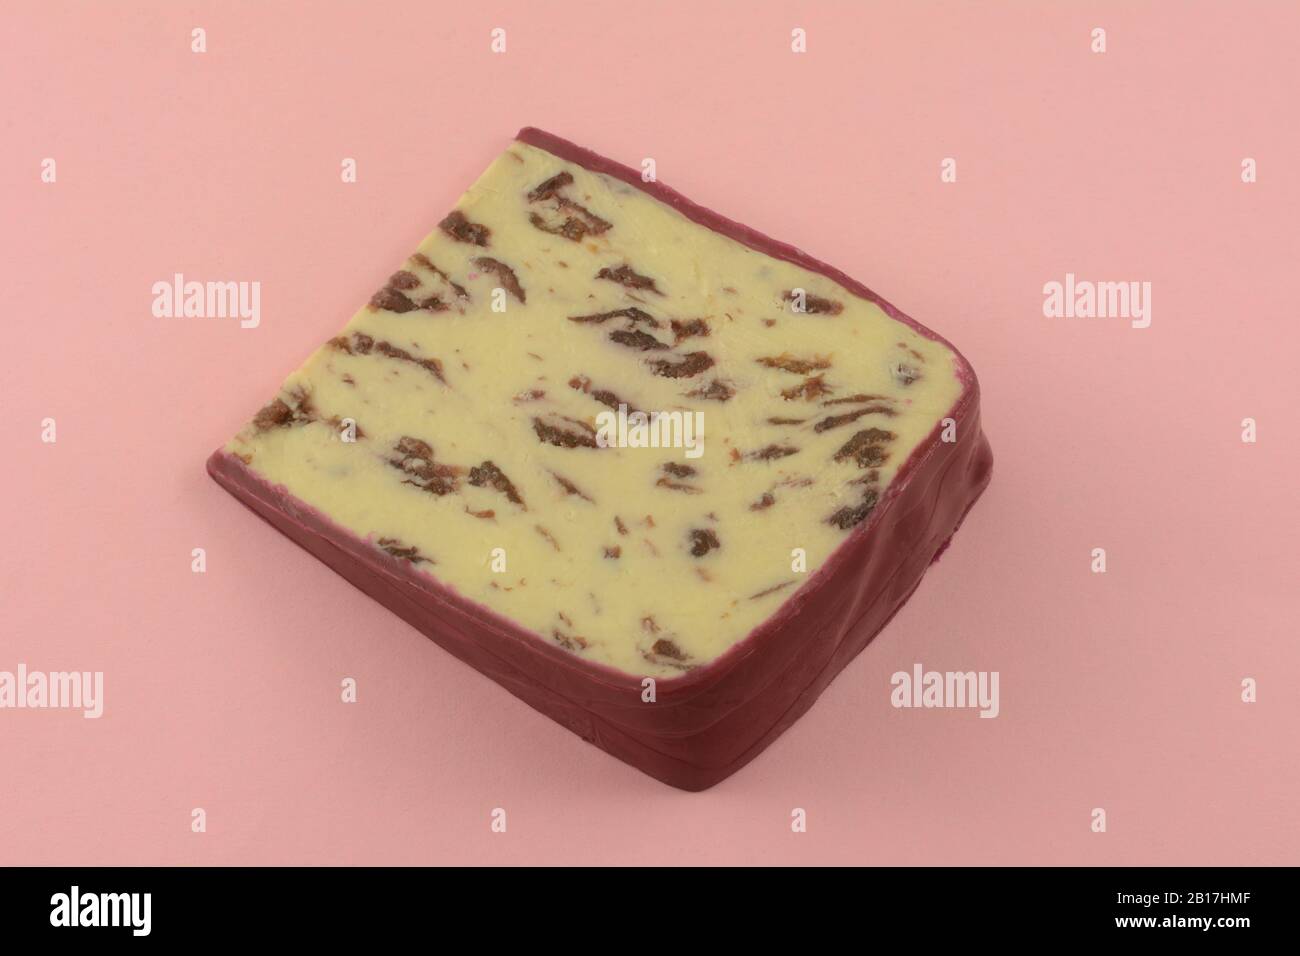 Slice of Wensleydale cranberry cheese with wax edges on pink background Stock Photo